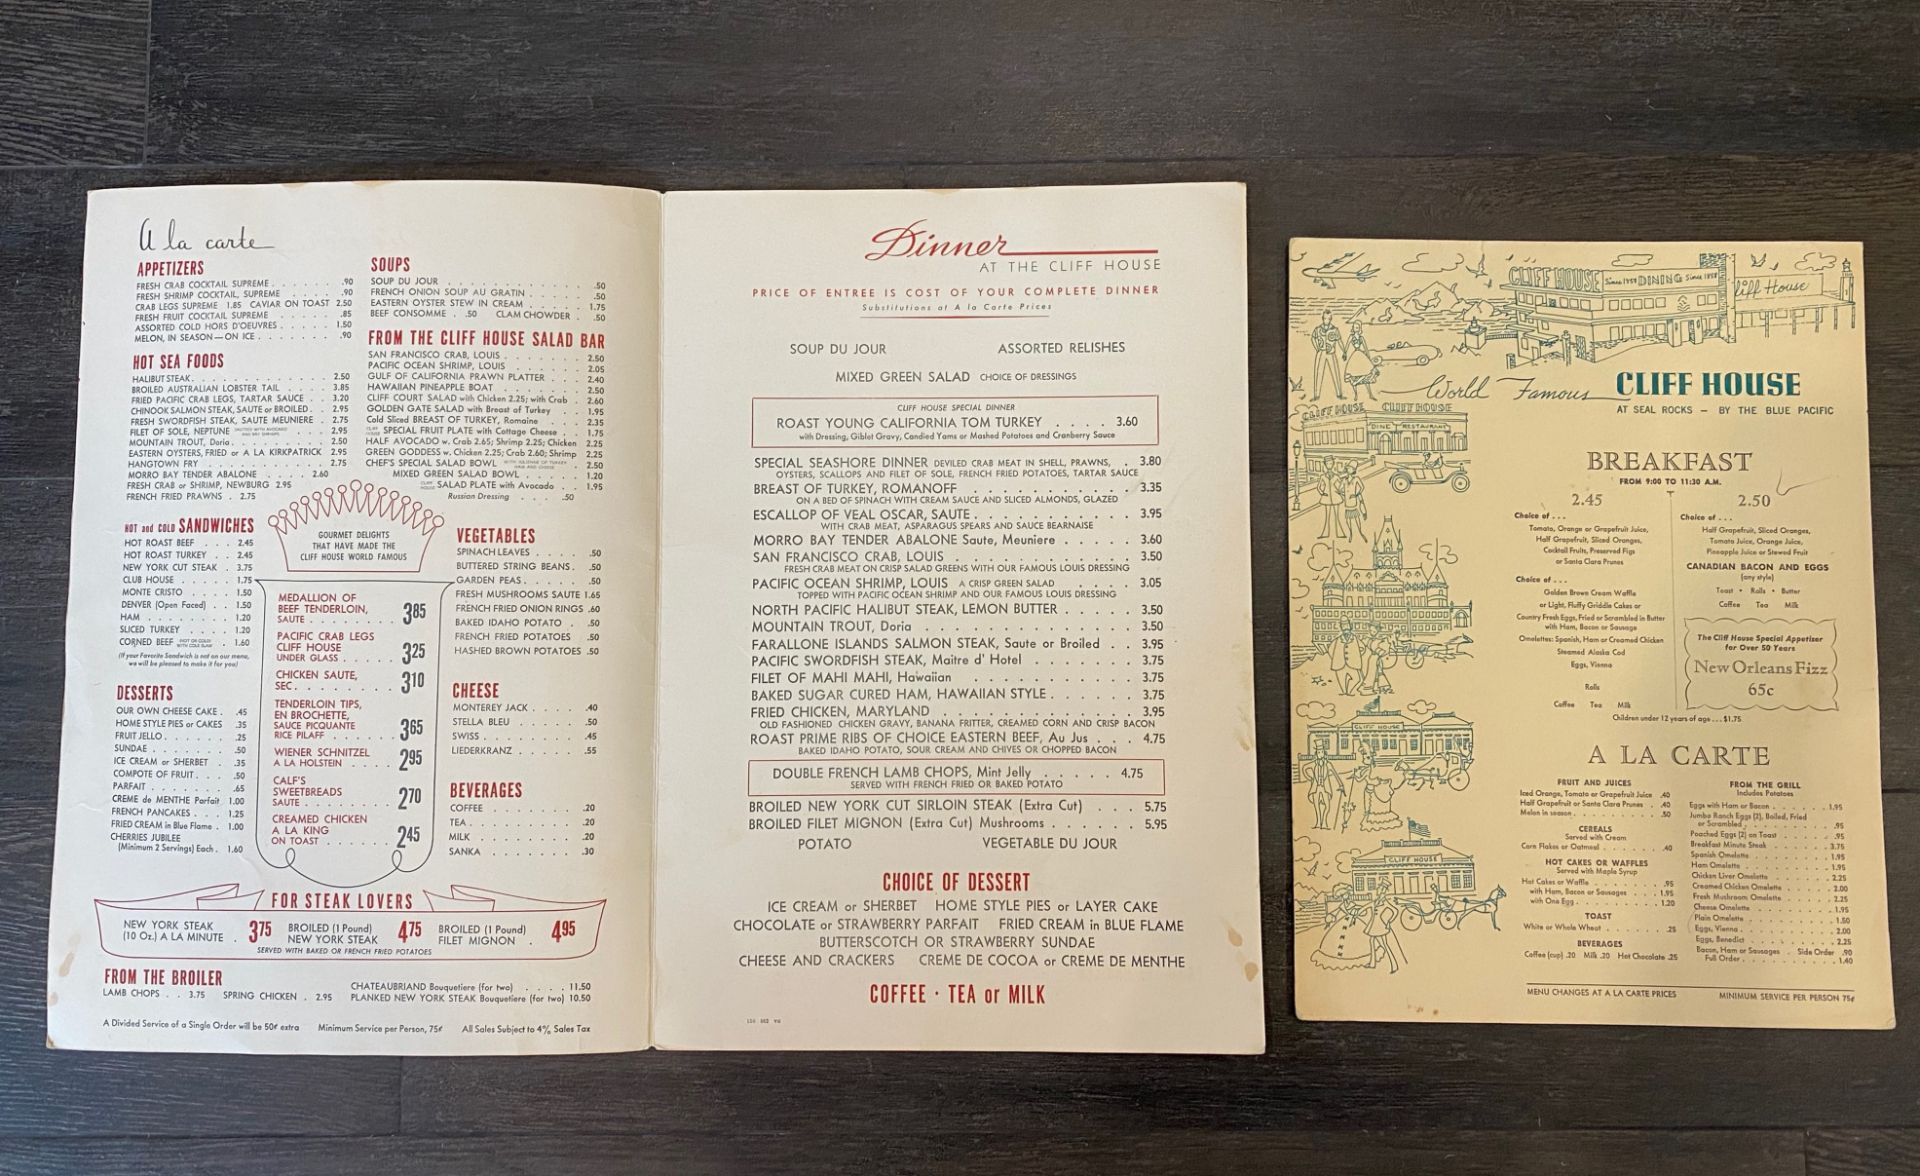 Cliff House Menu - Red - Image 4 of 4